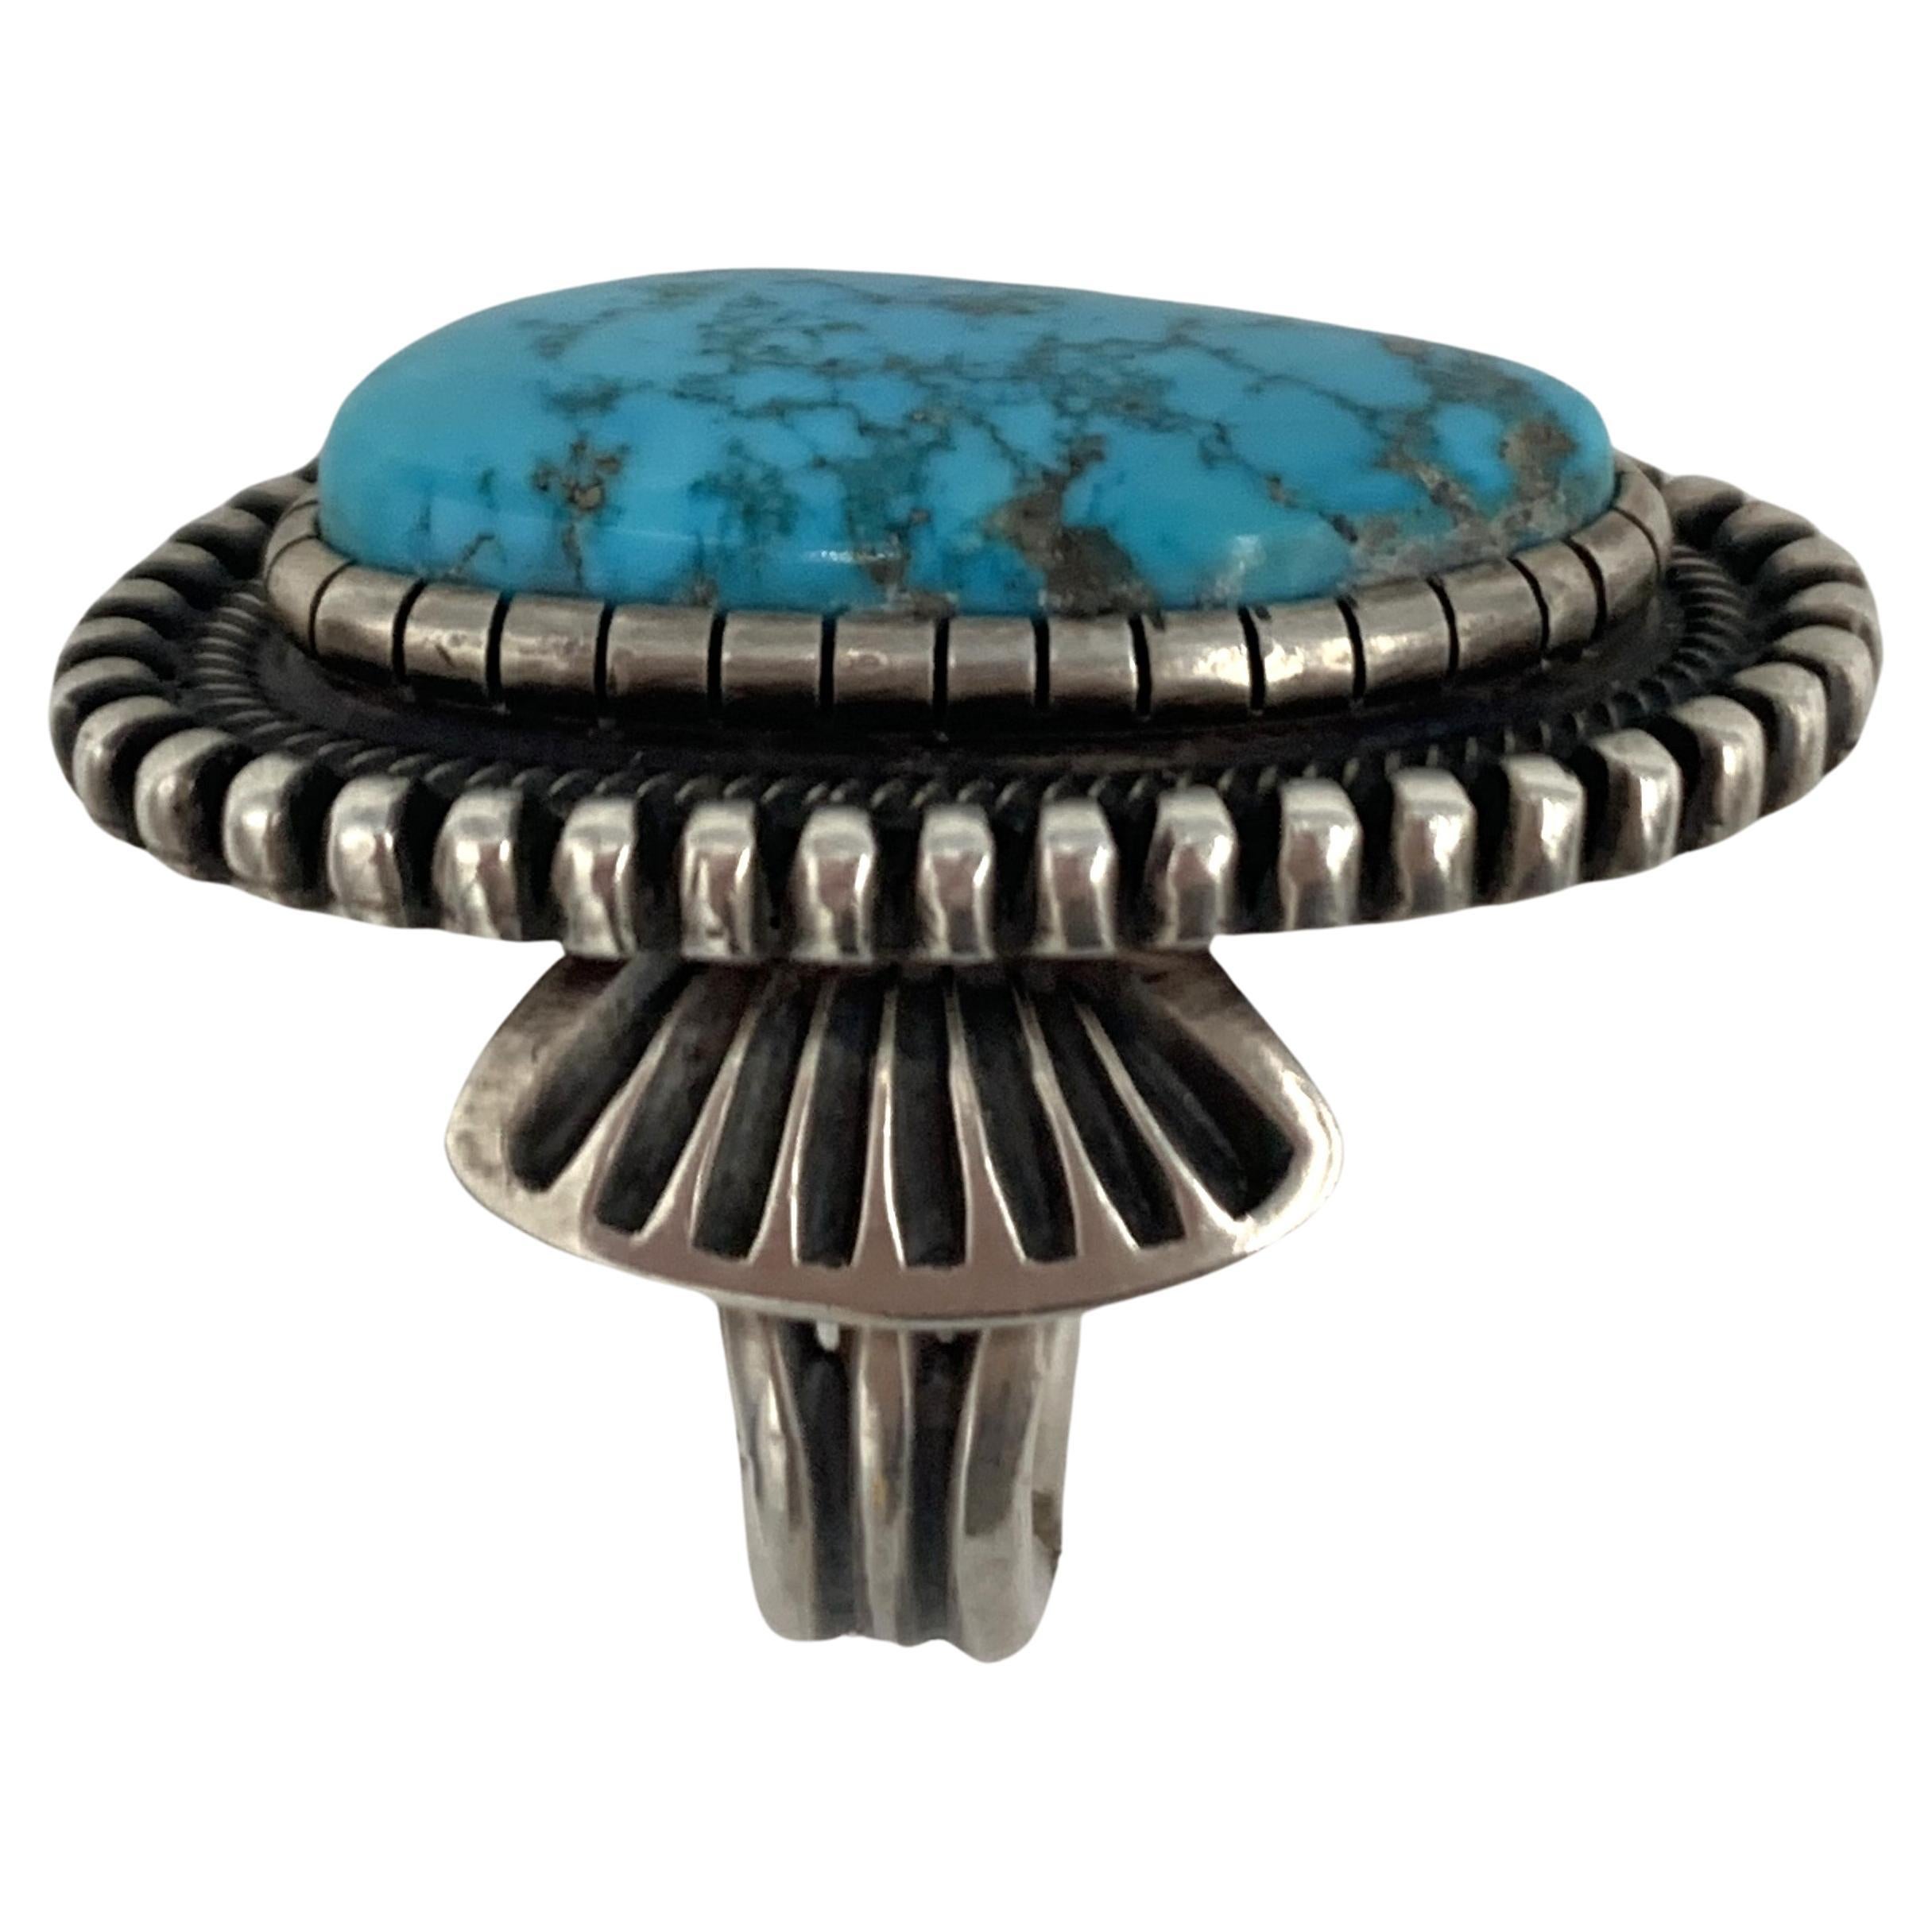 Turquoise Ring with Sterling Silver Setting made by Navajo Silversmith Terry Martinez.

The silver work on this ring is made in a traditional Navajo manner. Terry hand stamped deep Navajo designs around the entire ring.

Terry Martinez,